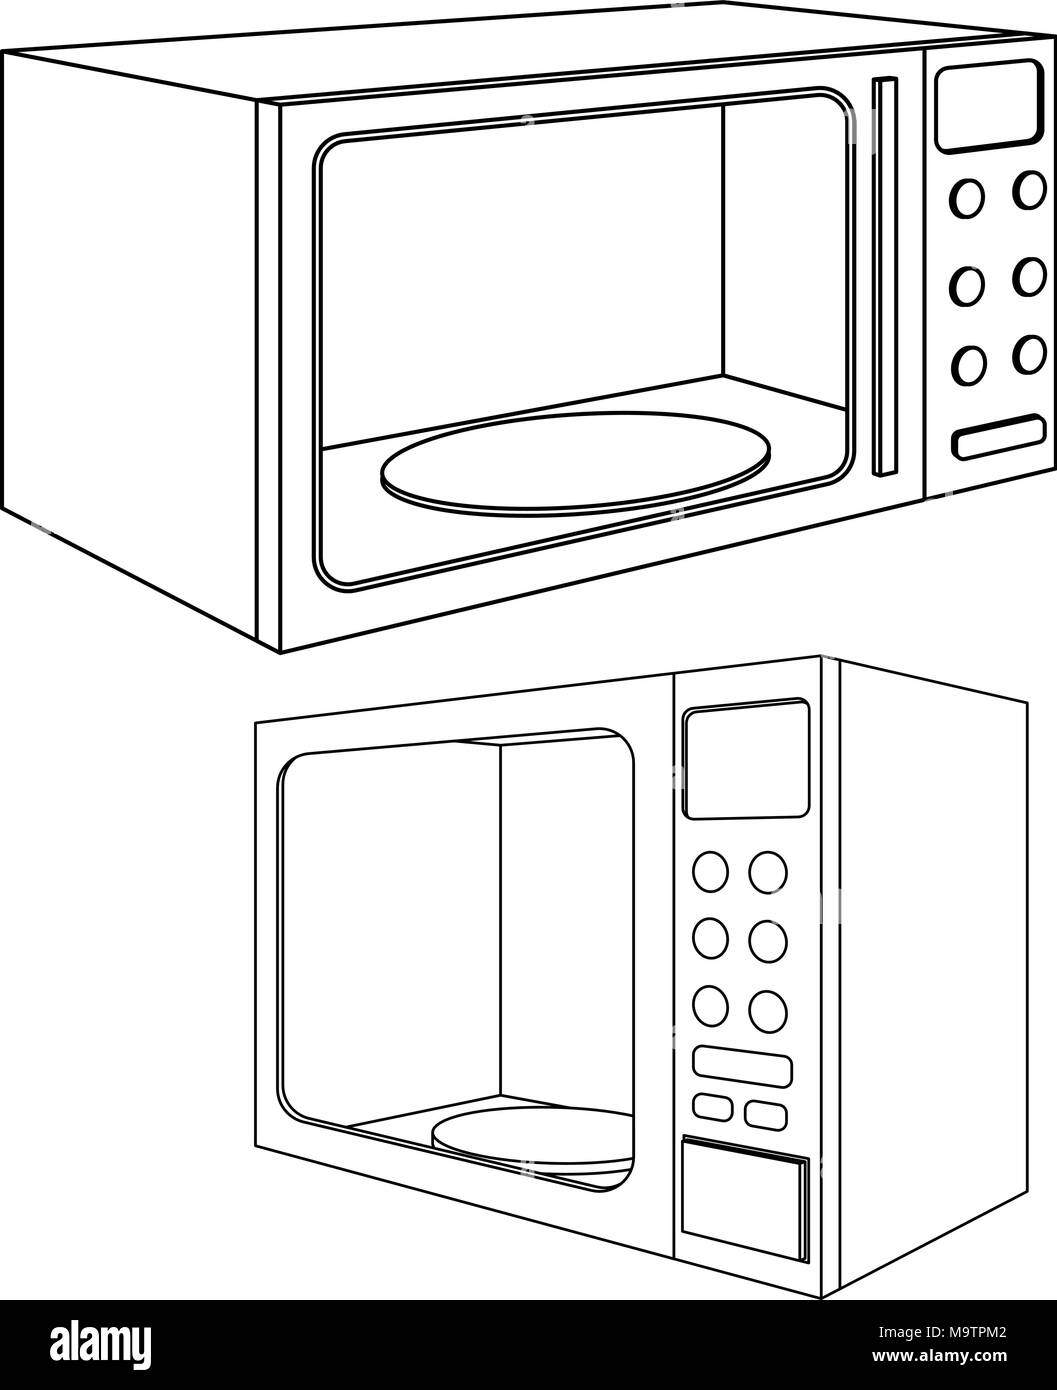 Microwave oven. Outline drawing Stock Vector